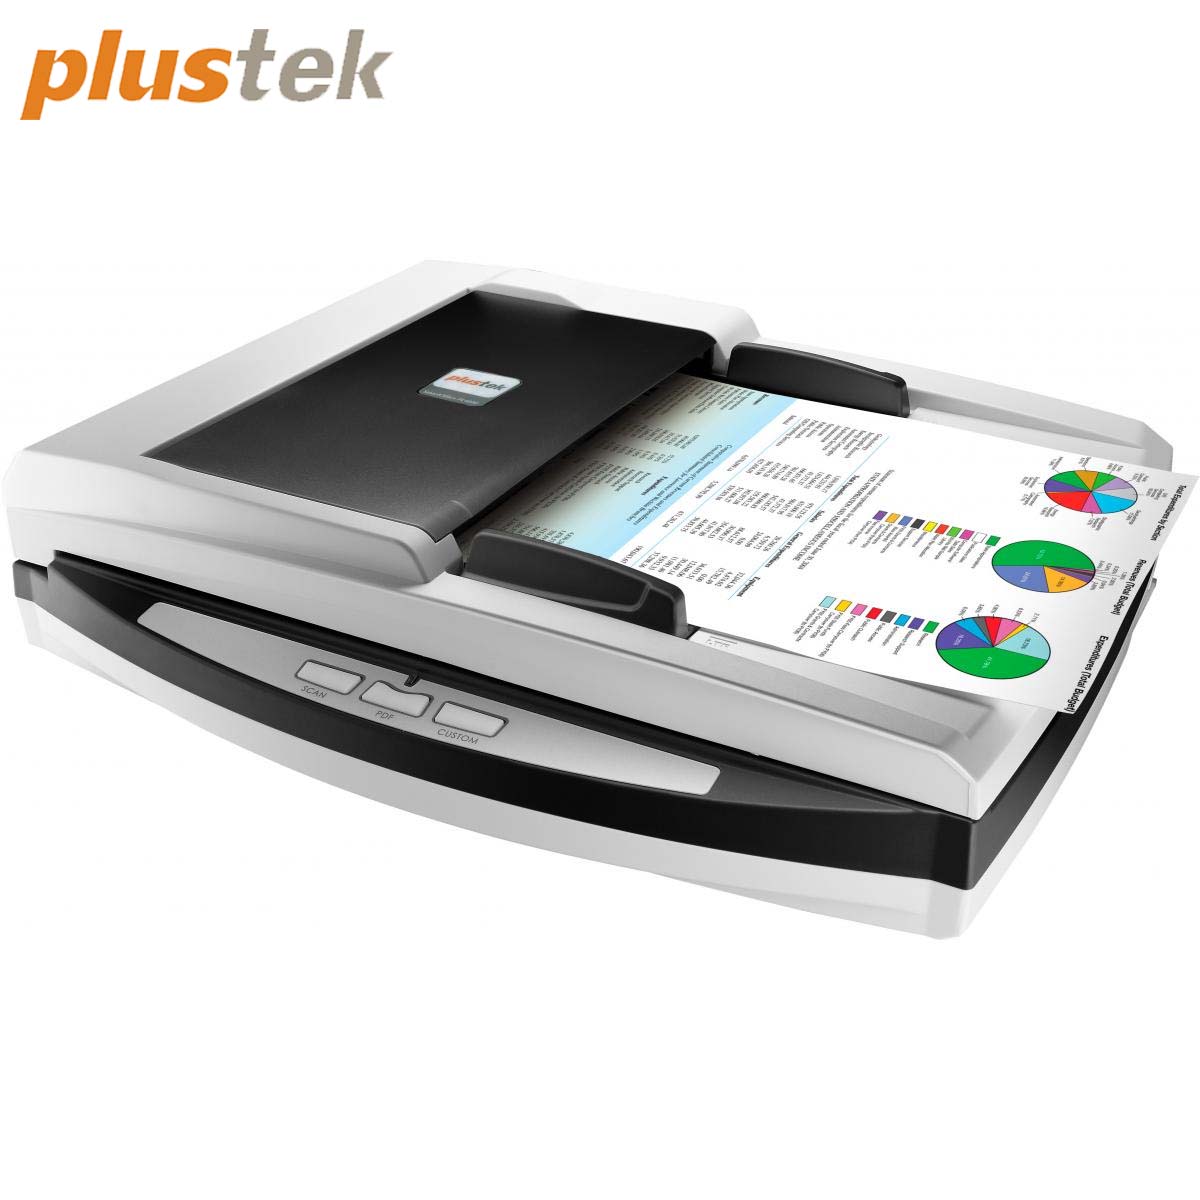 Plustek PL4080 - High Speed Versatile Scanner, Flatbed + ADF All in one. with 50 Sheet Document Feeder and A4 Size Flatbed scan Special Design Suit for Multi Folded documents